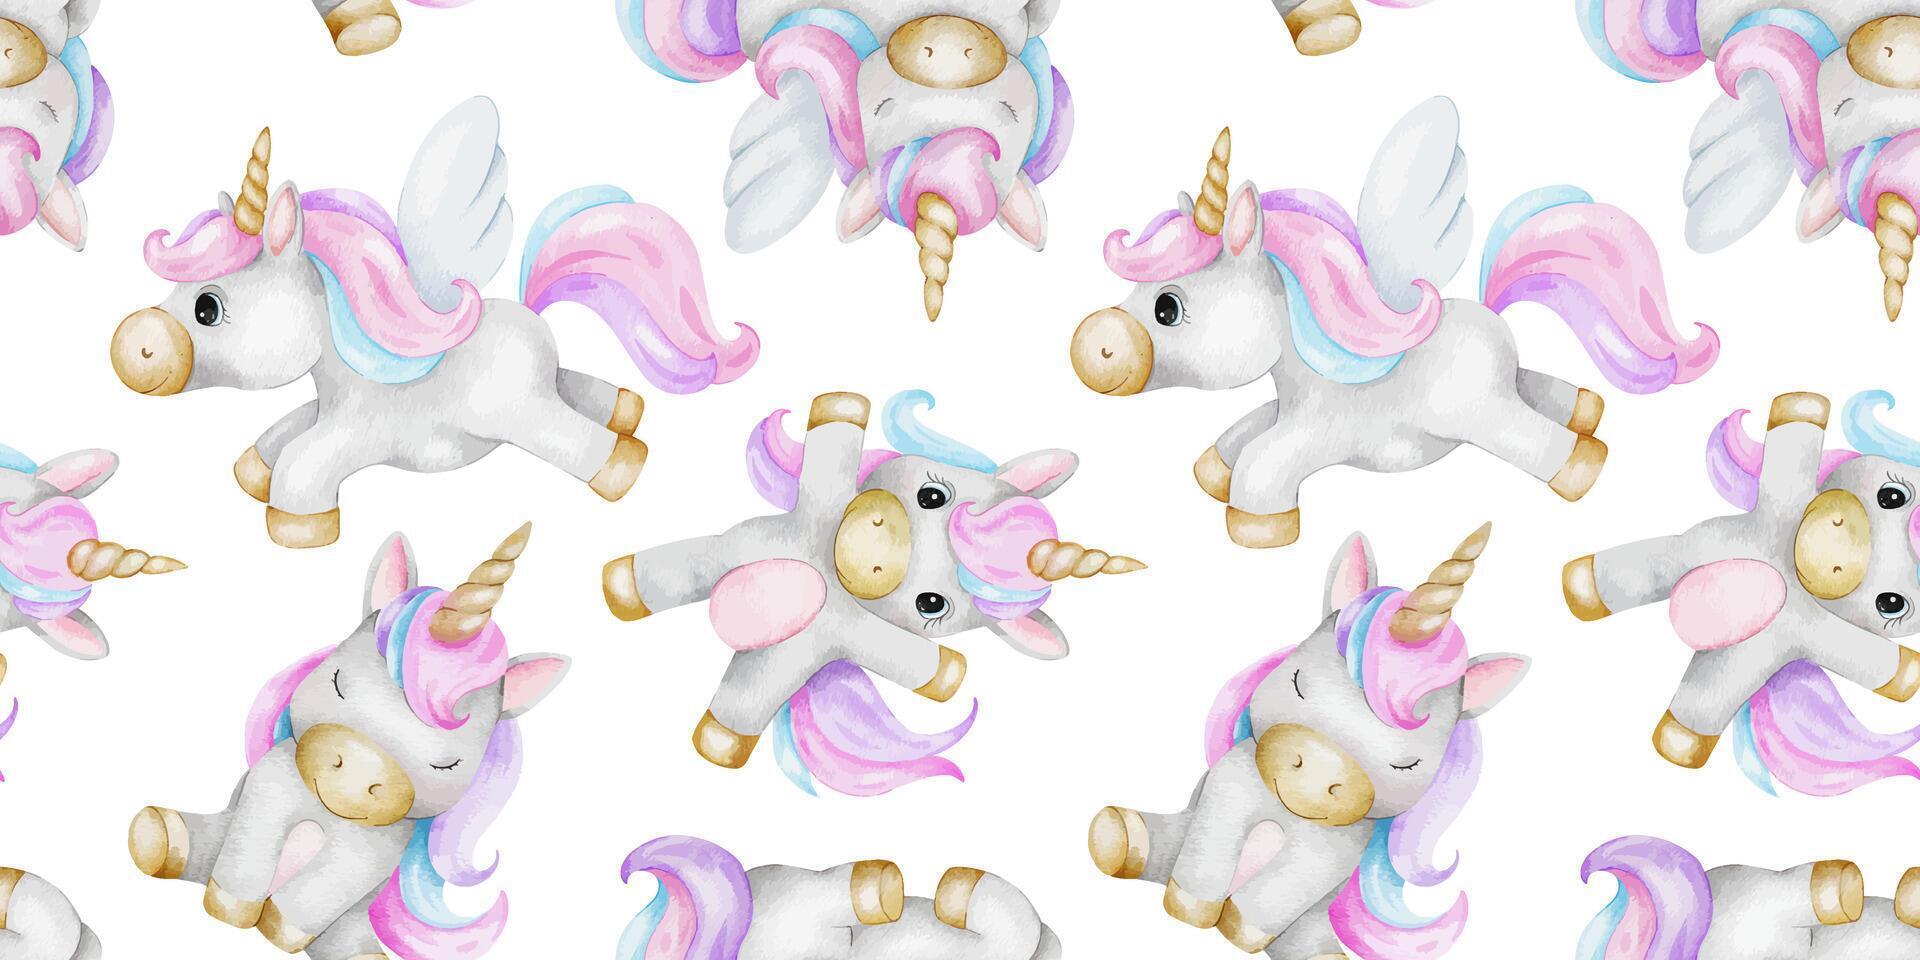 Print of cute little unicorns. Background of baby ponies. Watercolor hand drawn seamless pattern for children's rooms, goods, clothes, postcards, baby shower and nursery, fabric vector